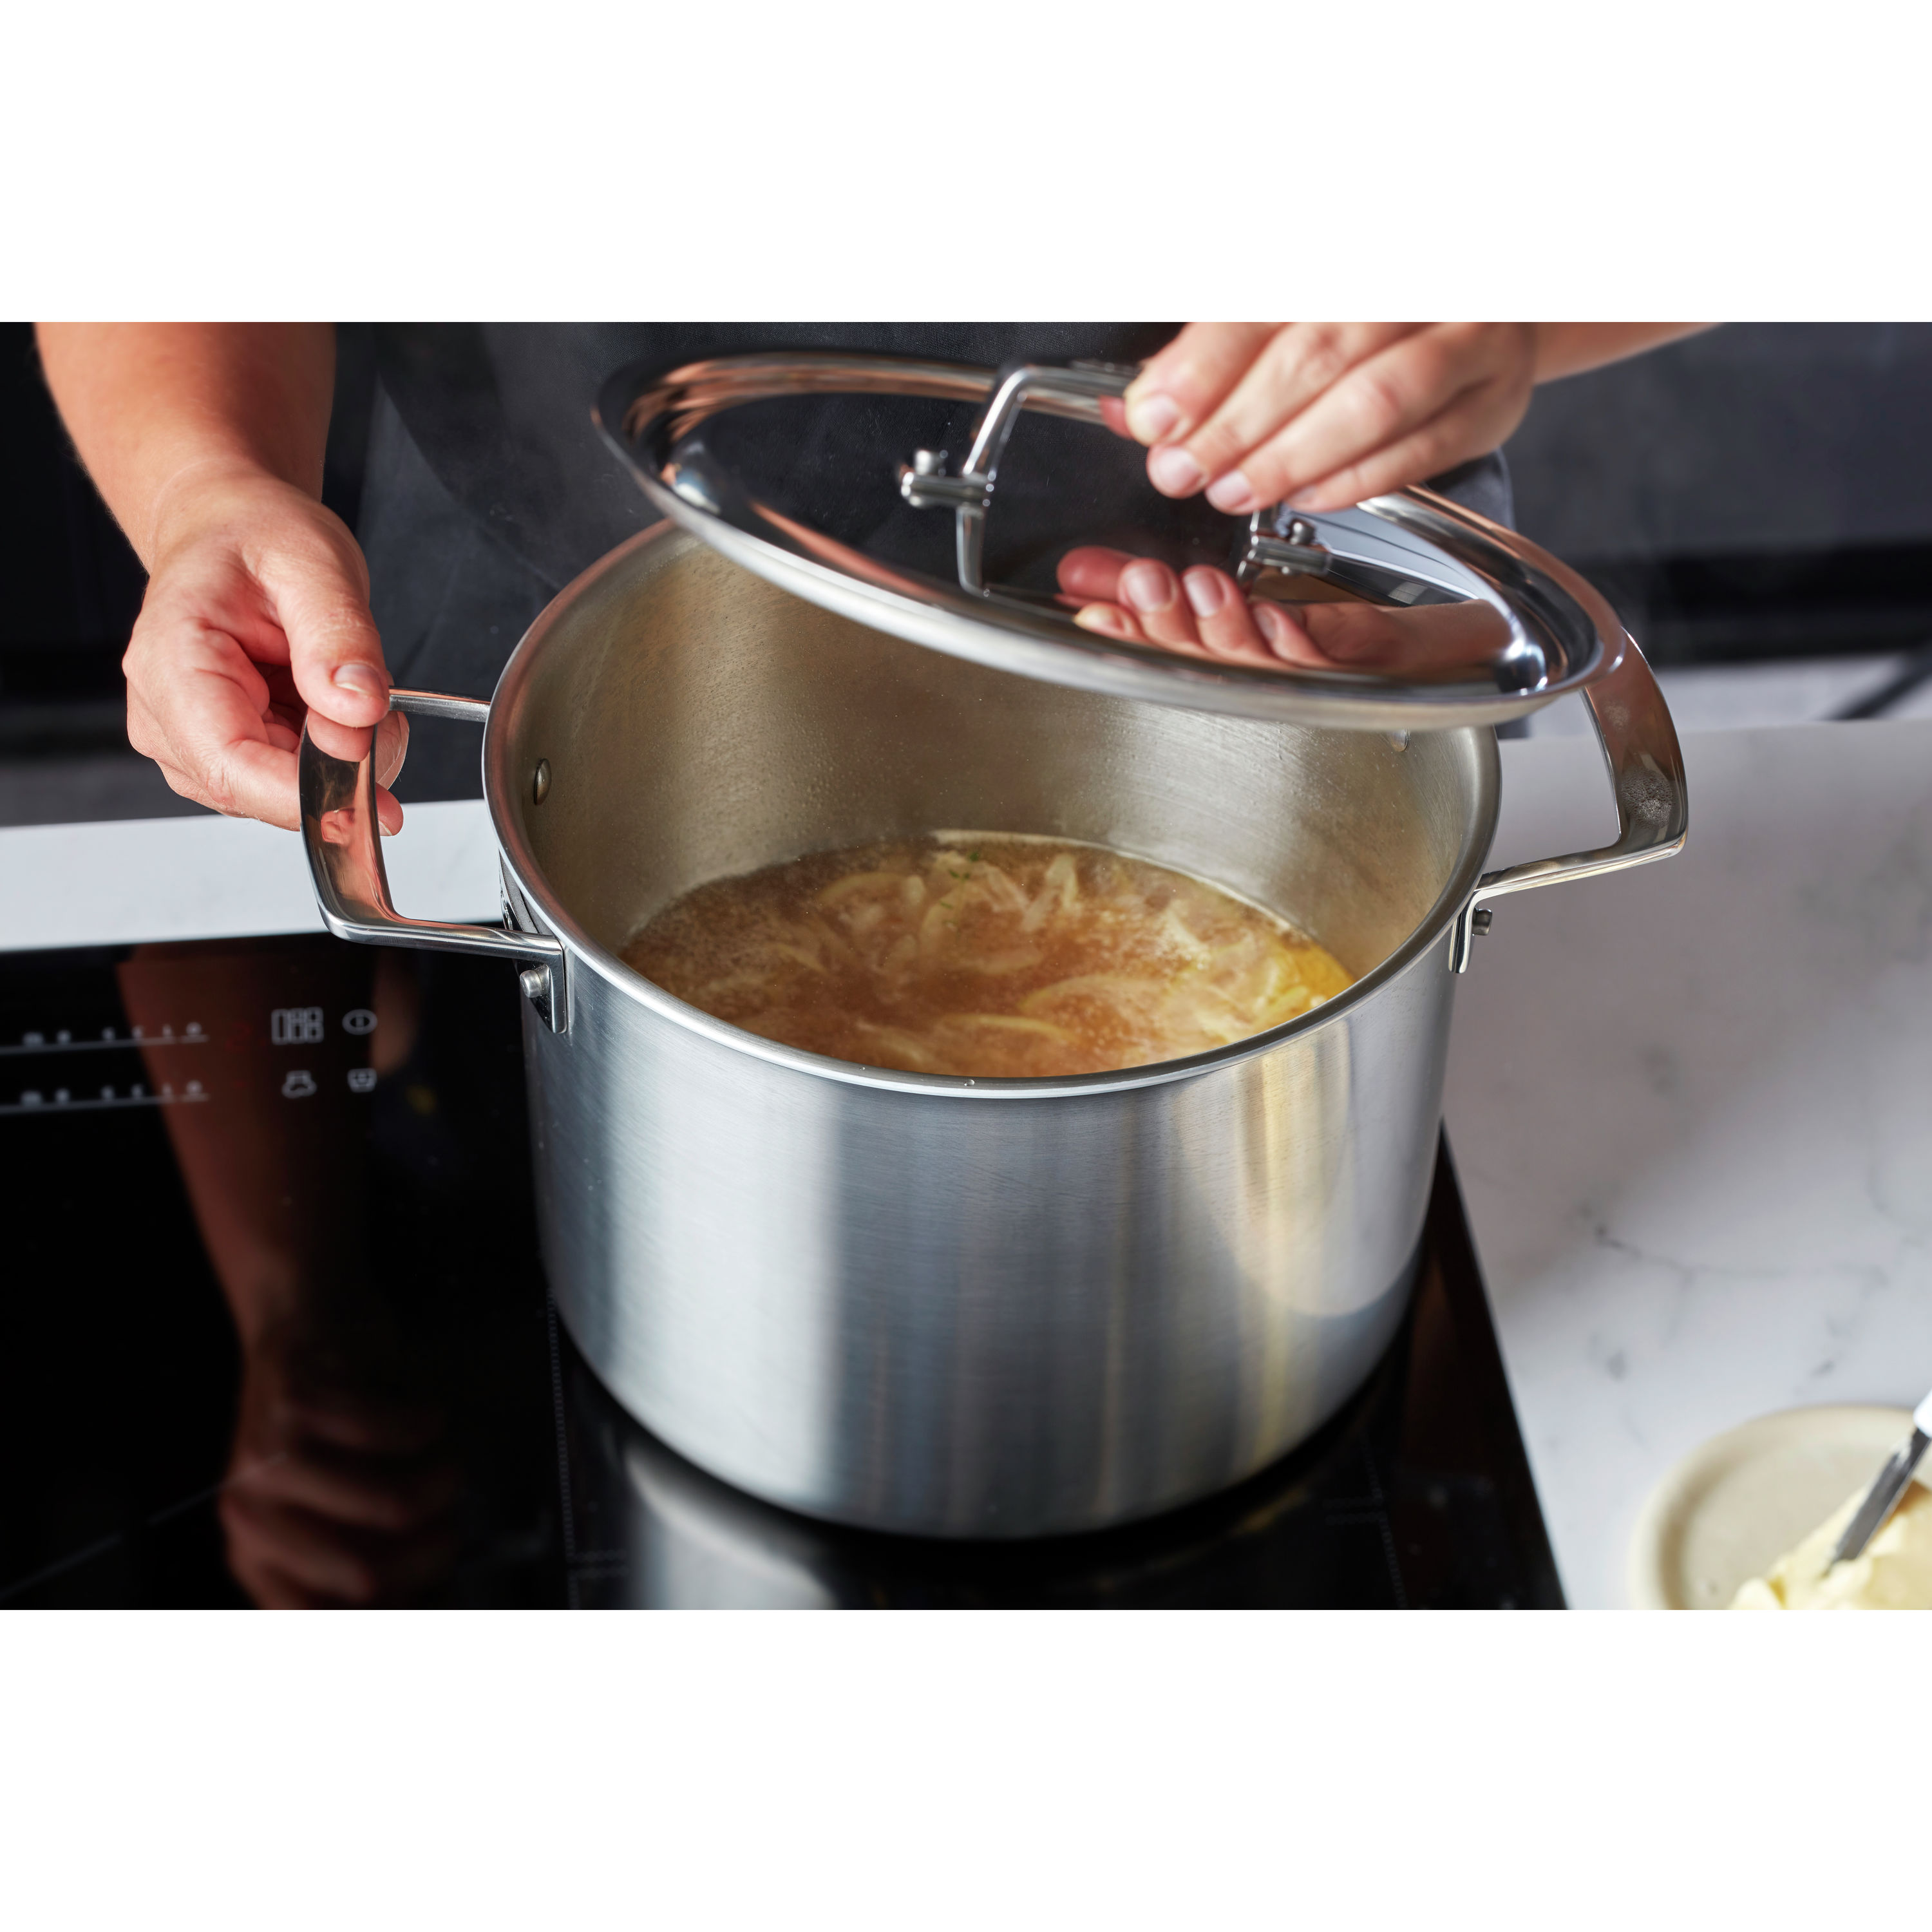 Demeyere Industry 5-Ply 8-qt Stainless Steel Stock Pot, 8-qt - King Soopers